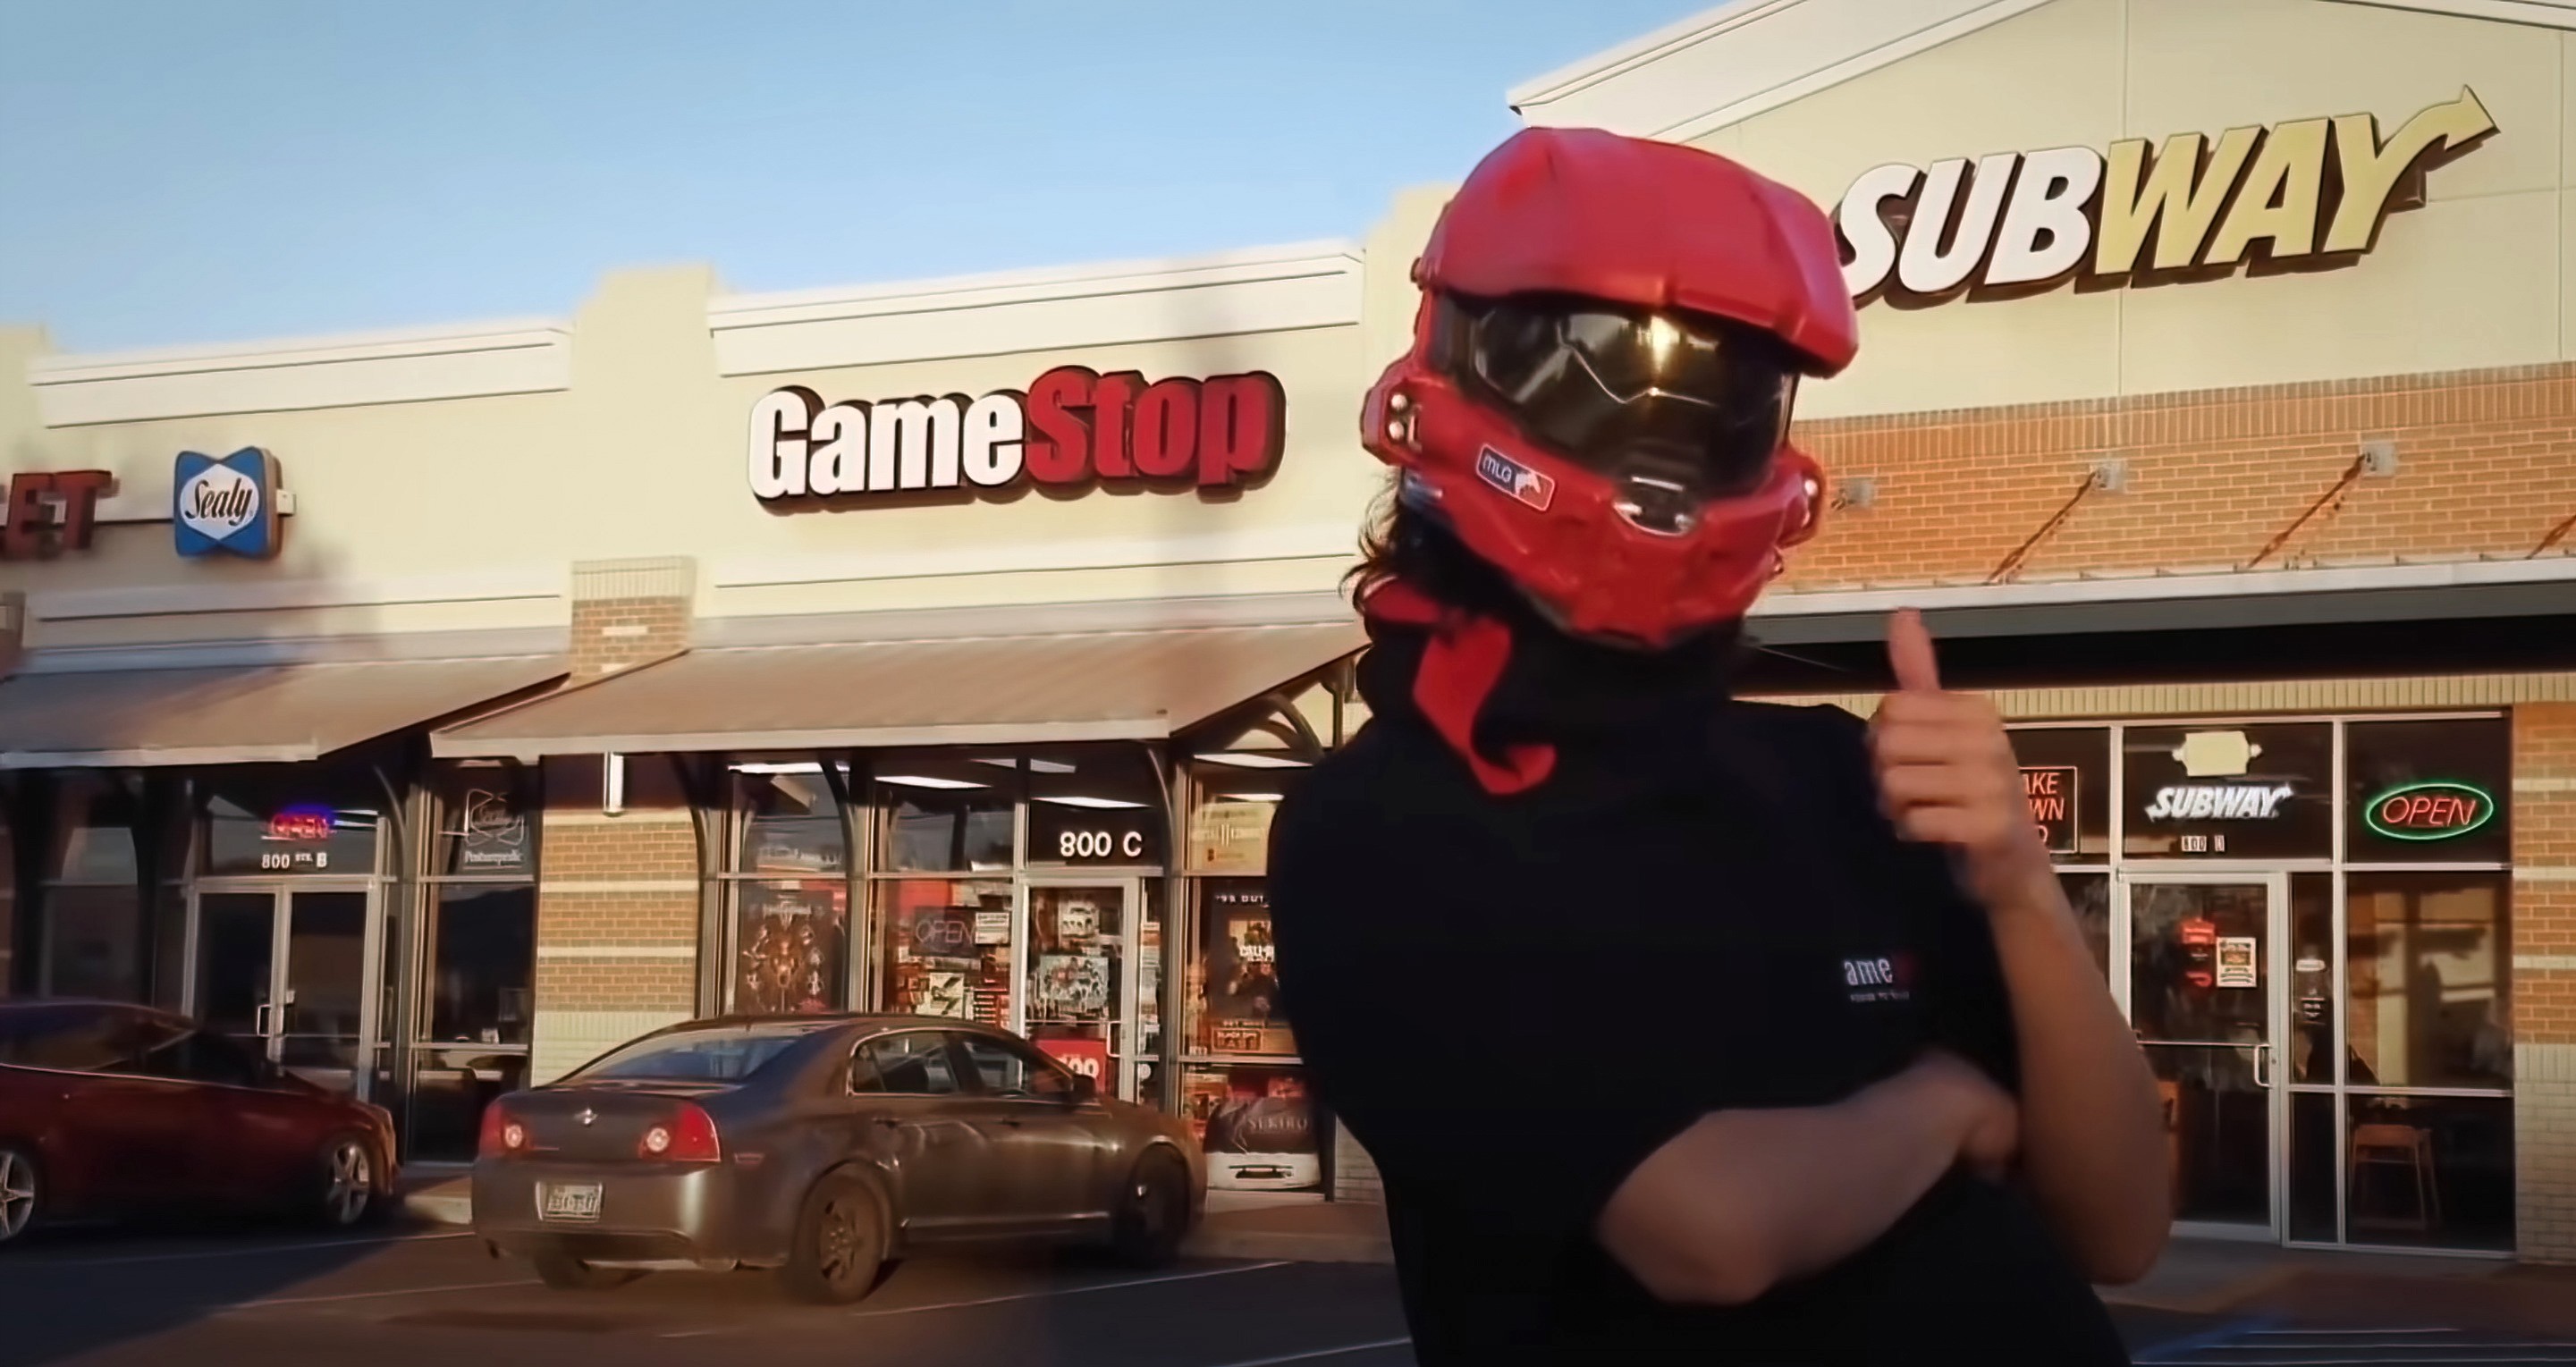 Gamestop with guy in front of it with a thumbs up sign